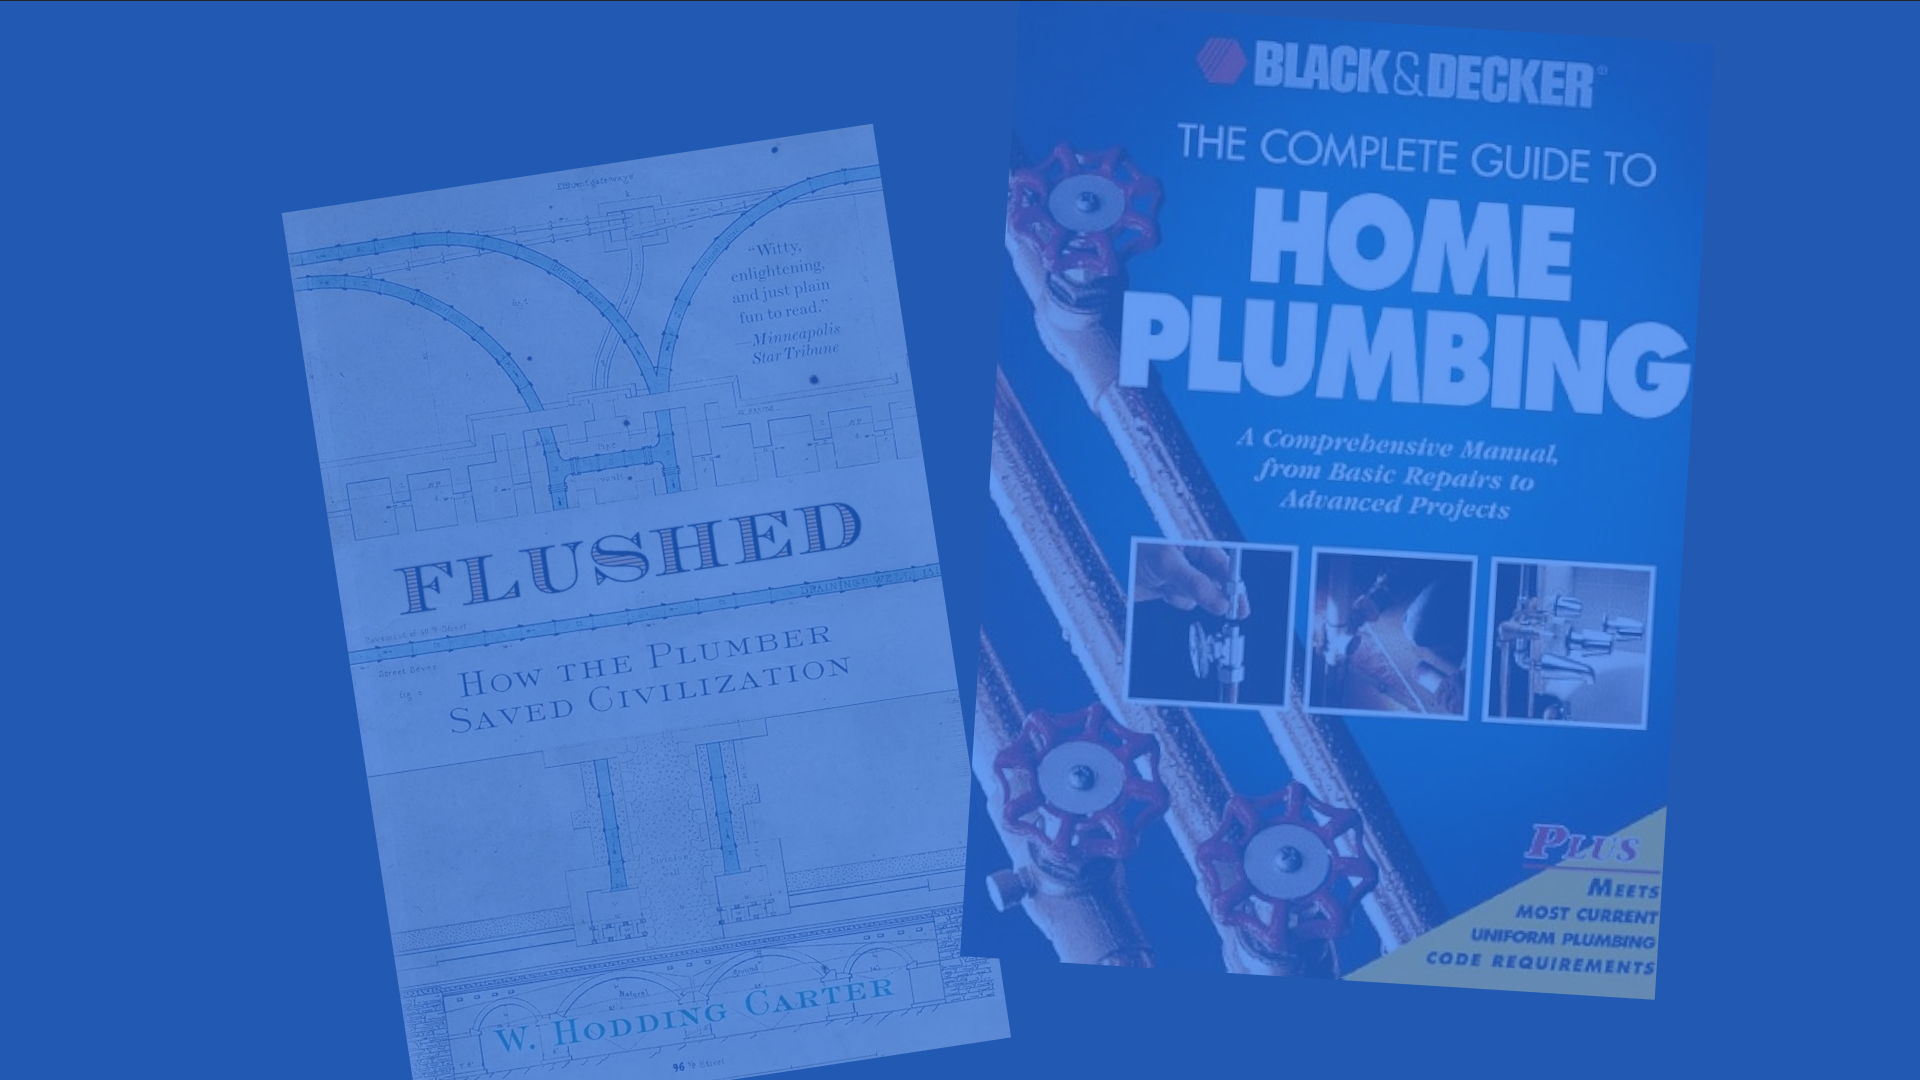 Plumbing 101: 25 Repairs & Projects You Really Can Do [Book]